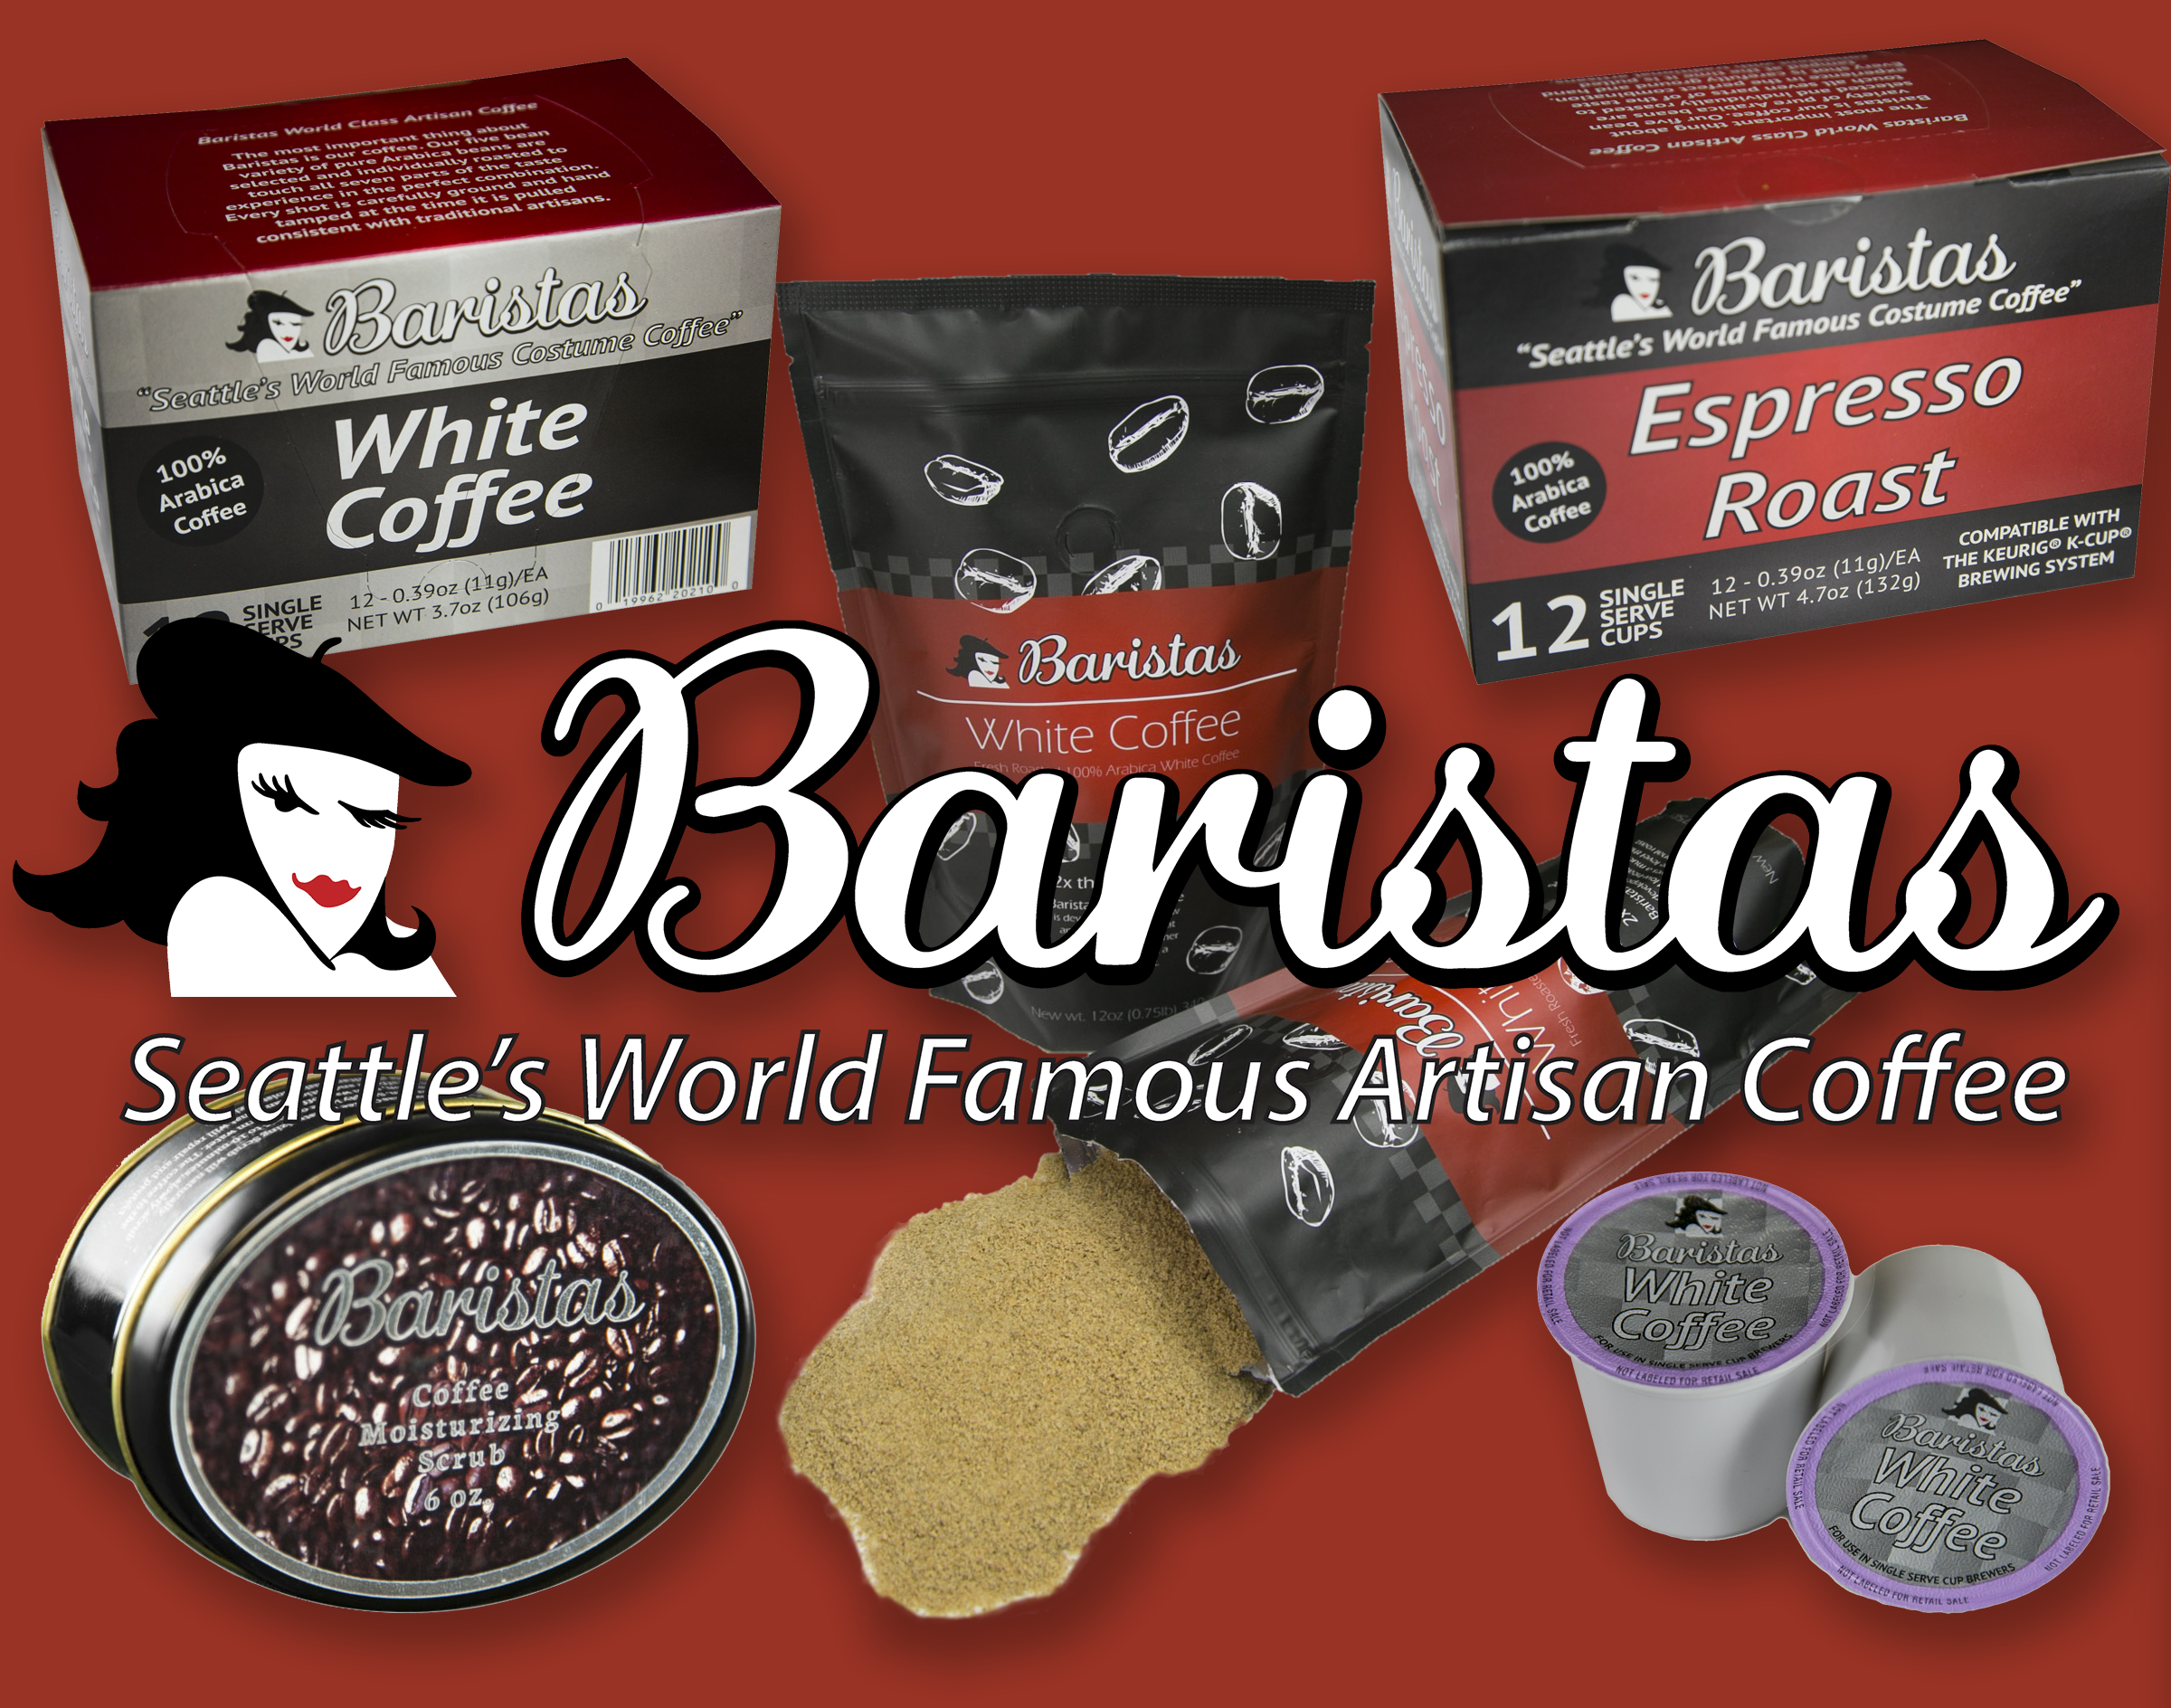 Baristas Coffee Company Inc., Monday, September 23, 2019, Press release picture